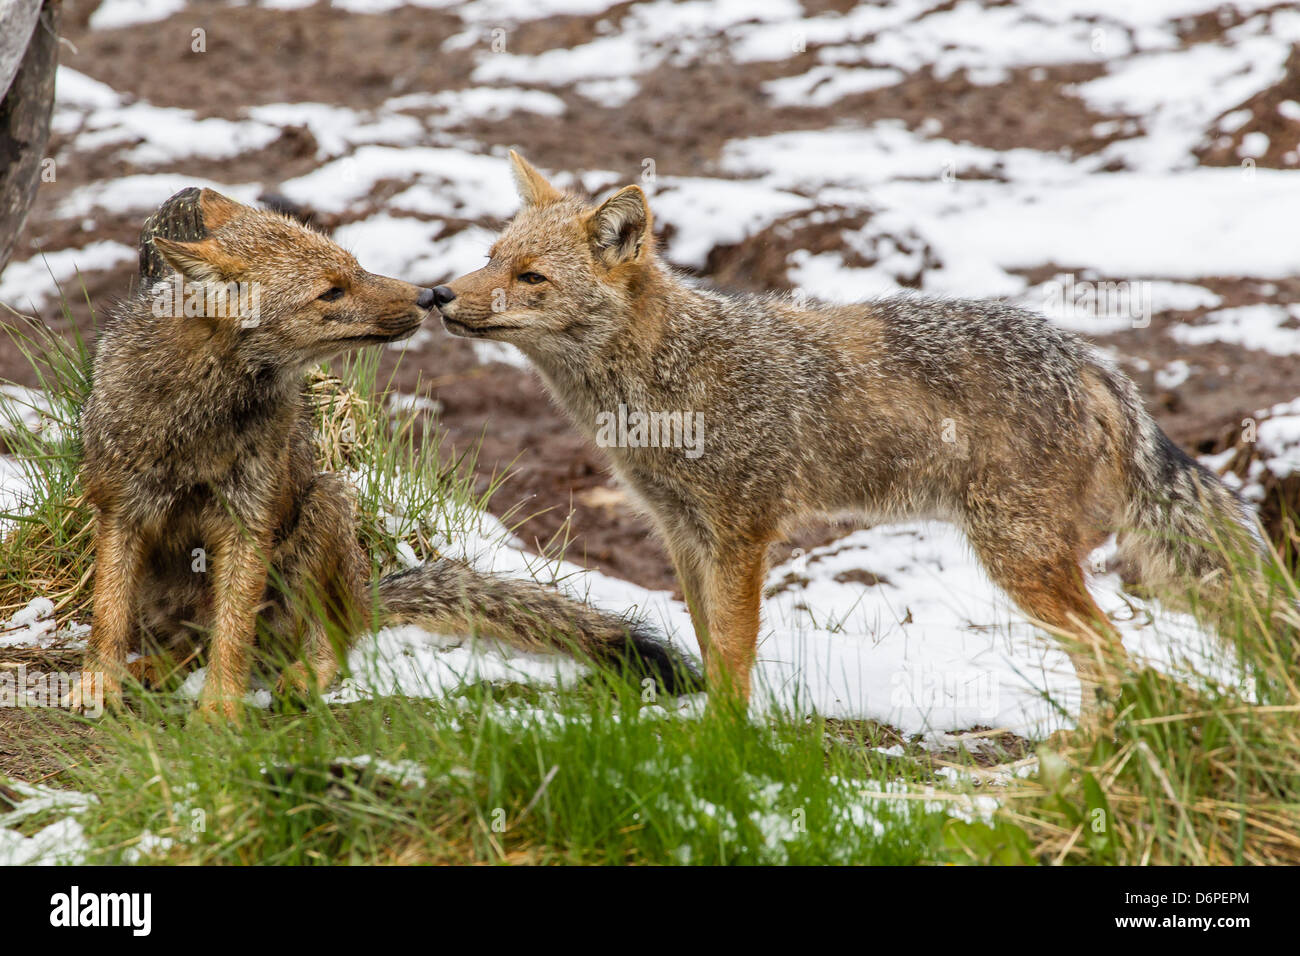 Adult Patagonian red fox (Lycalopex culpaeus) pair in La Pataya Bay, Beagle Channel, Argentina, South America Stock Photo